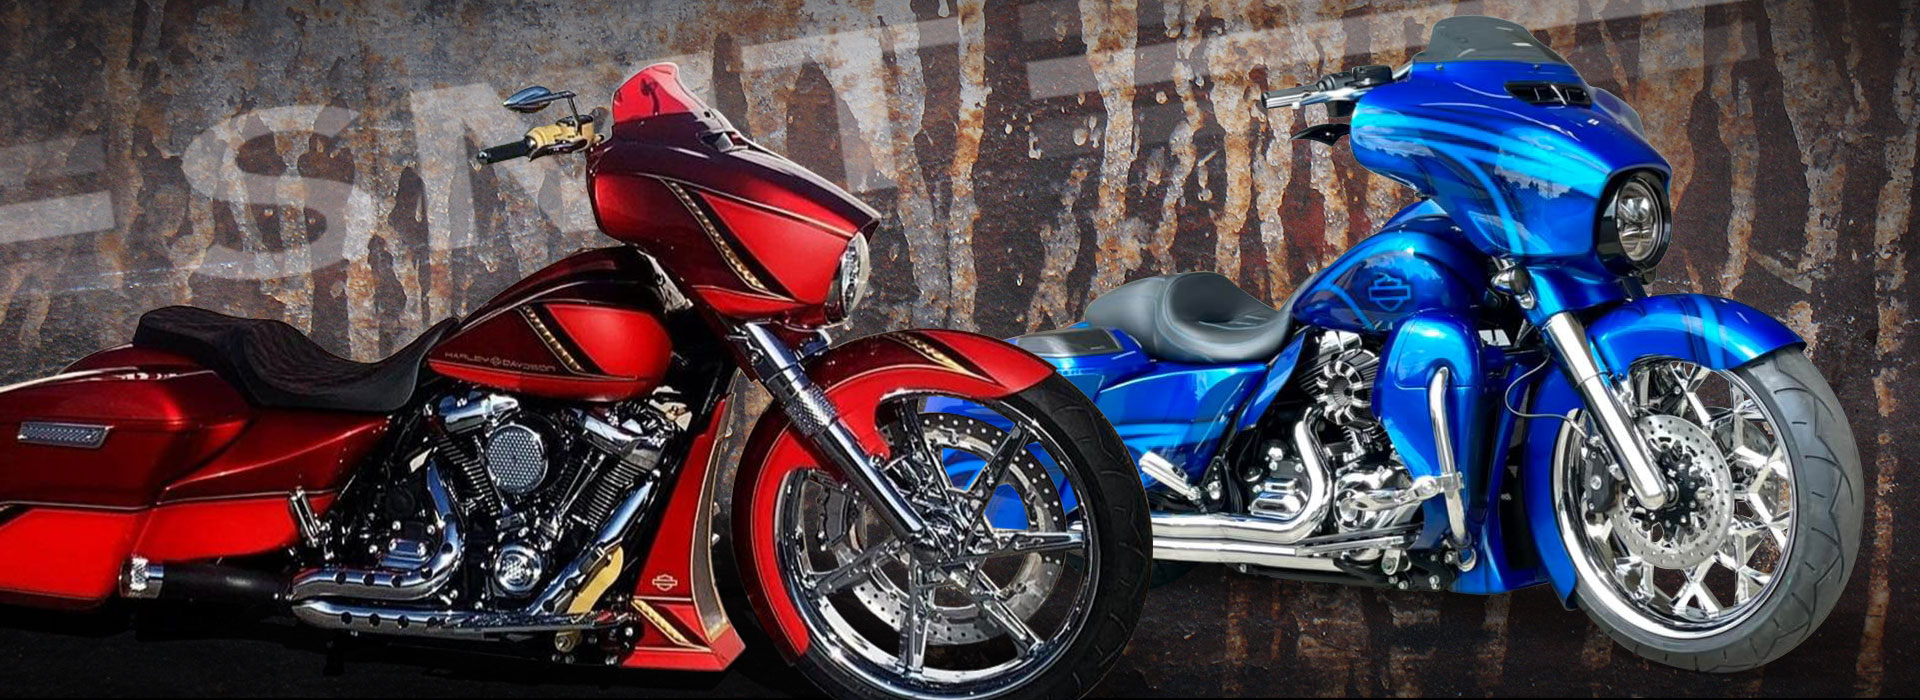 Why choose SMT for your Harley Street Glide wheels